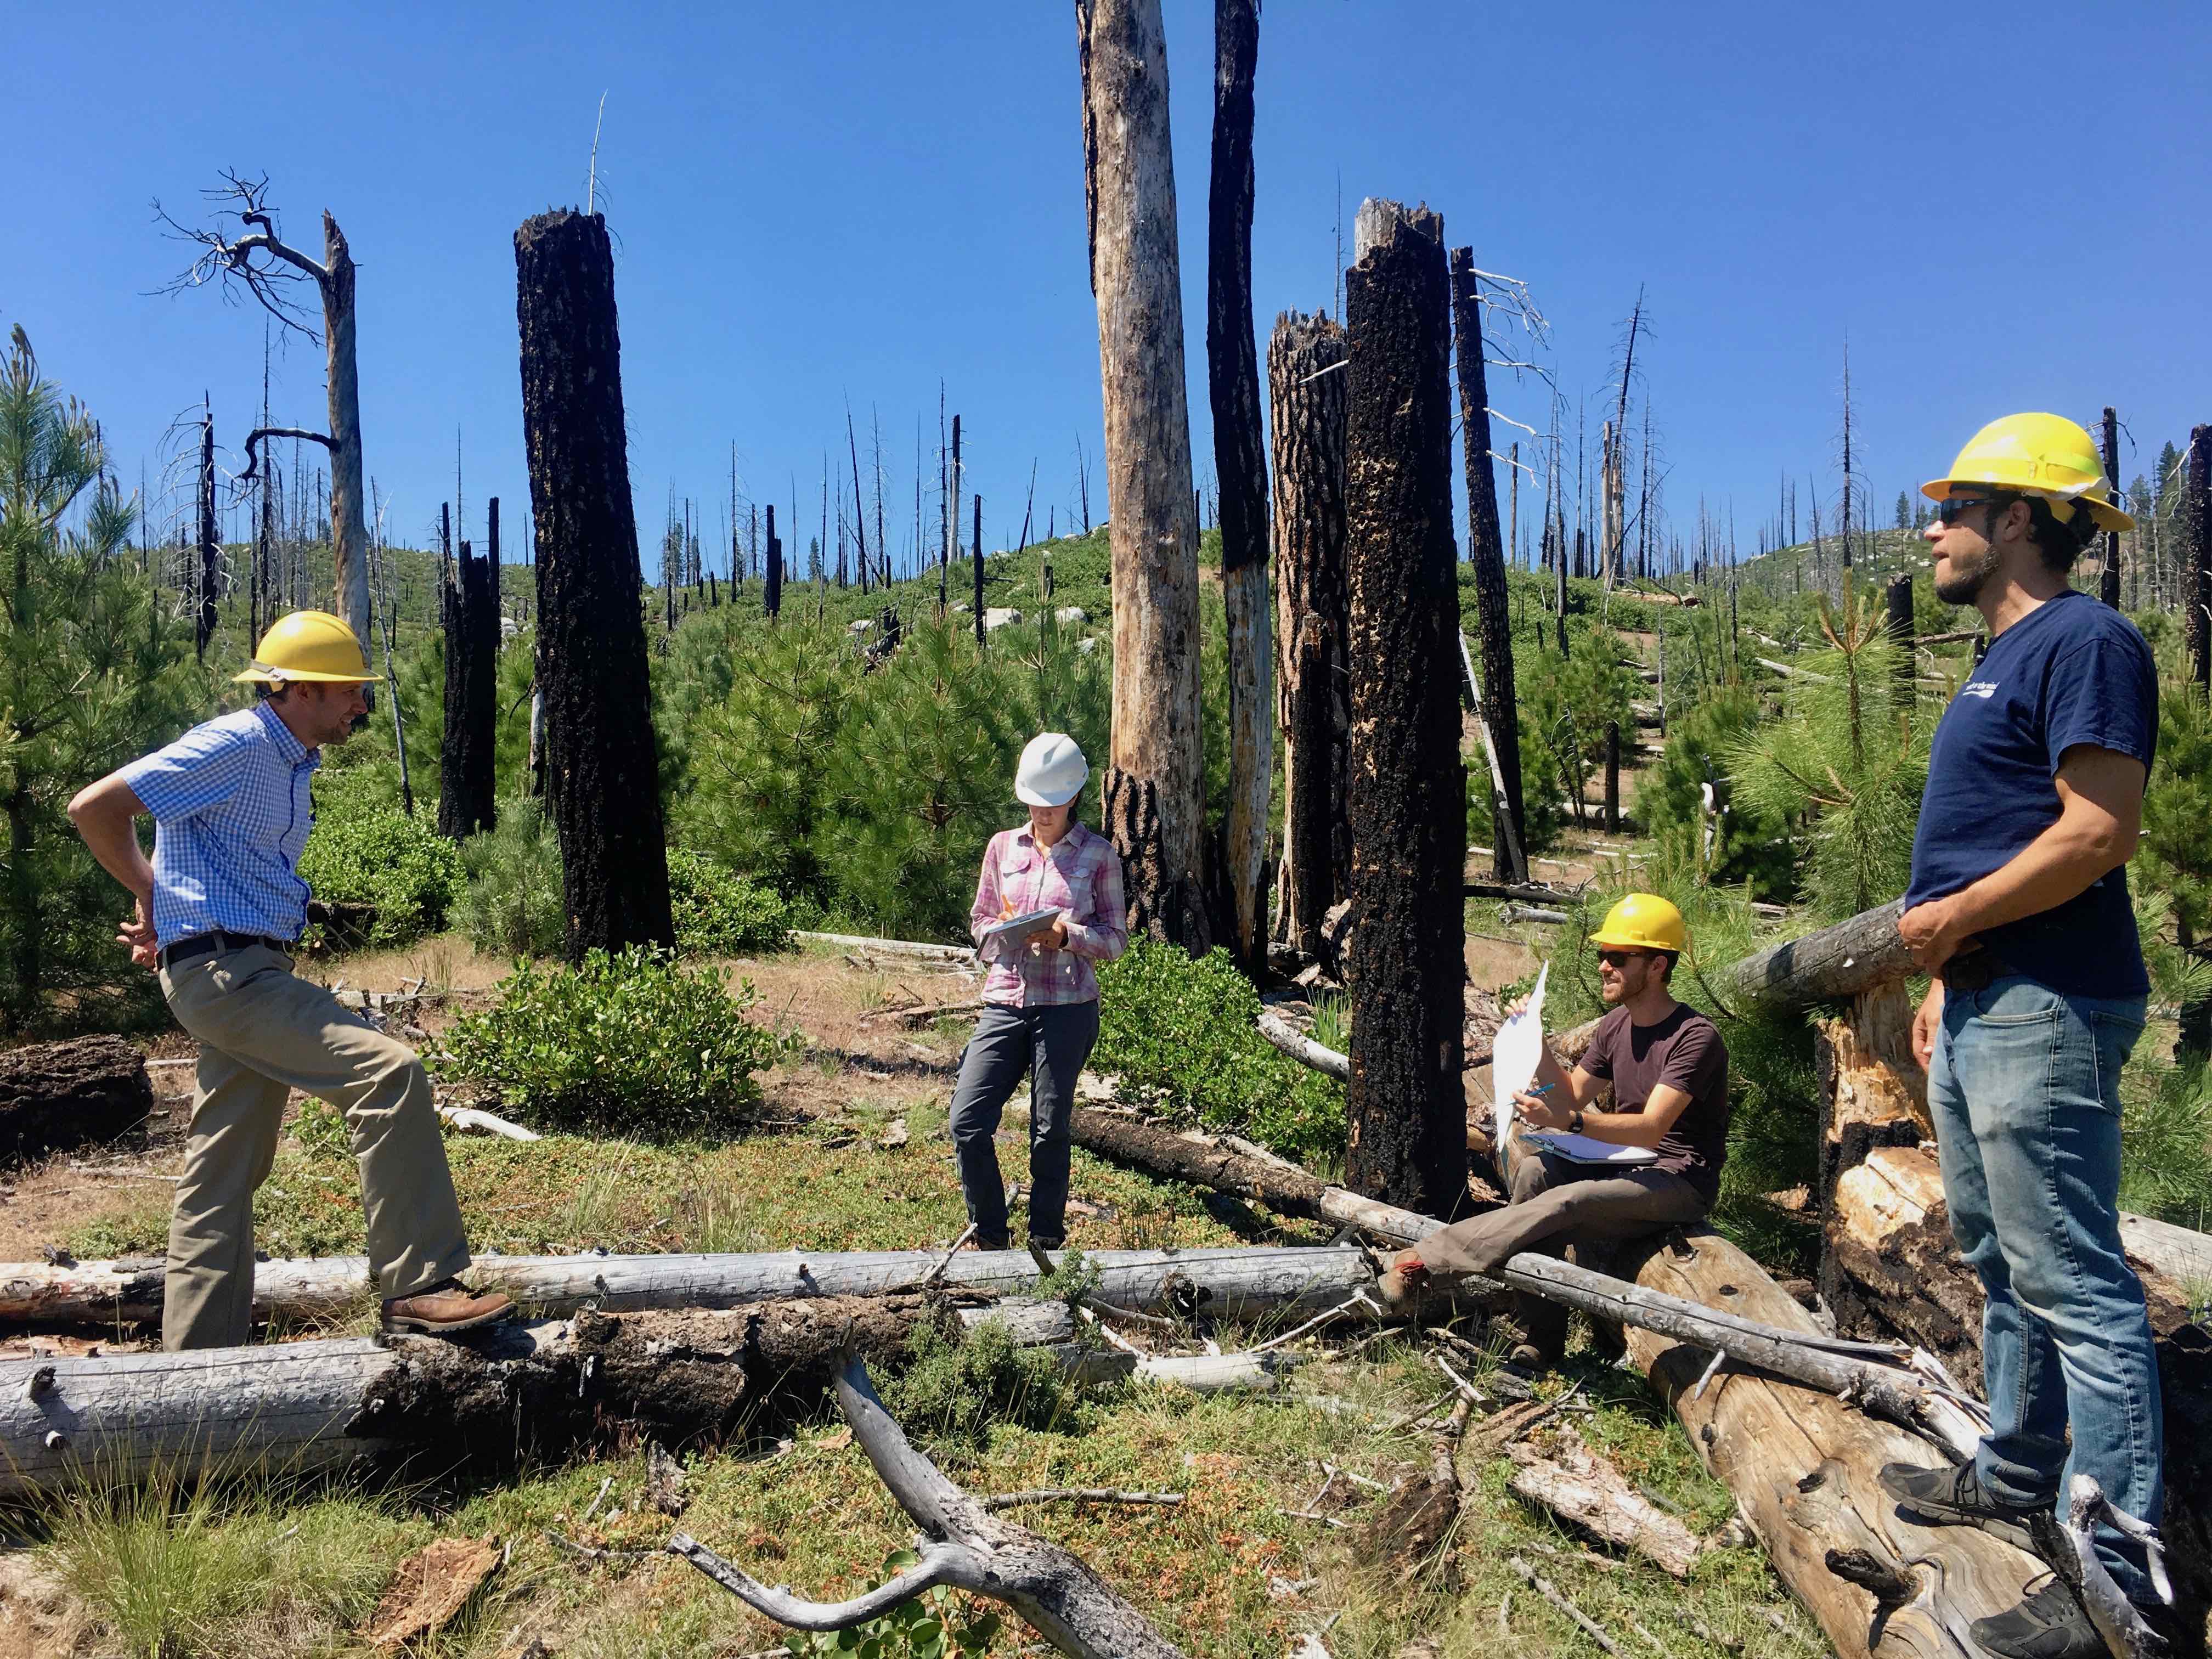 Discussing postfire tree regen with forest service